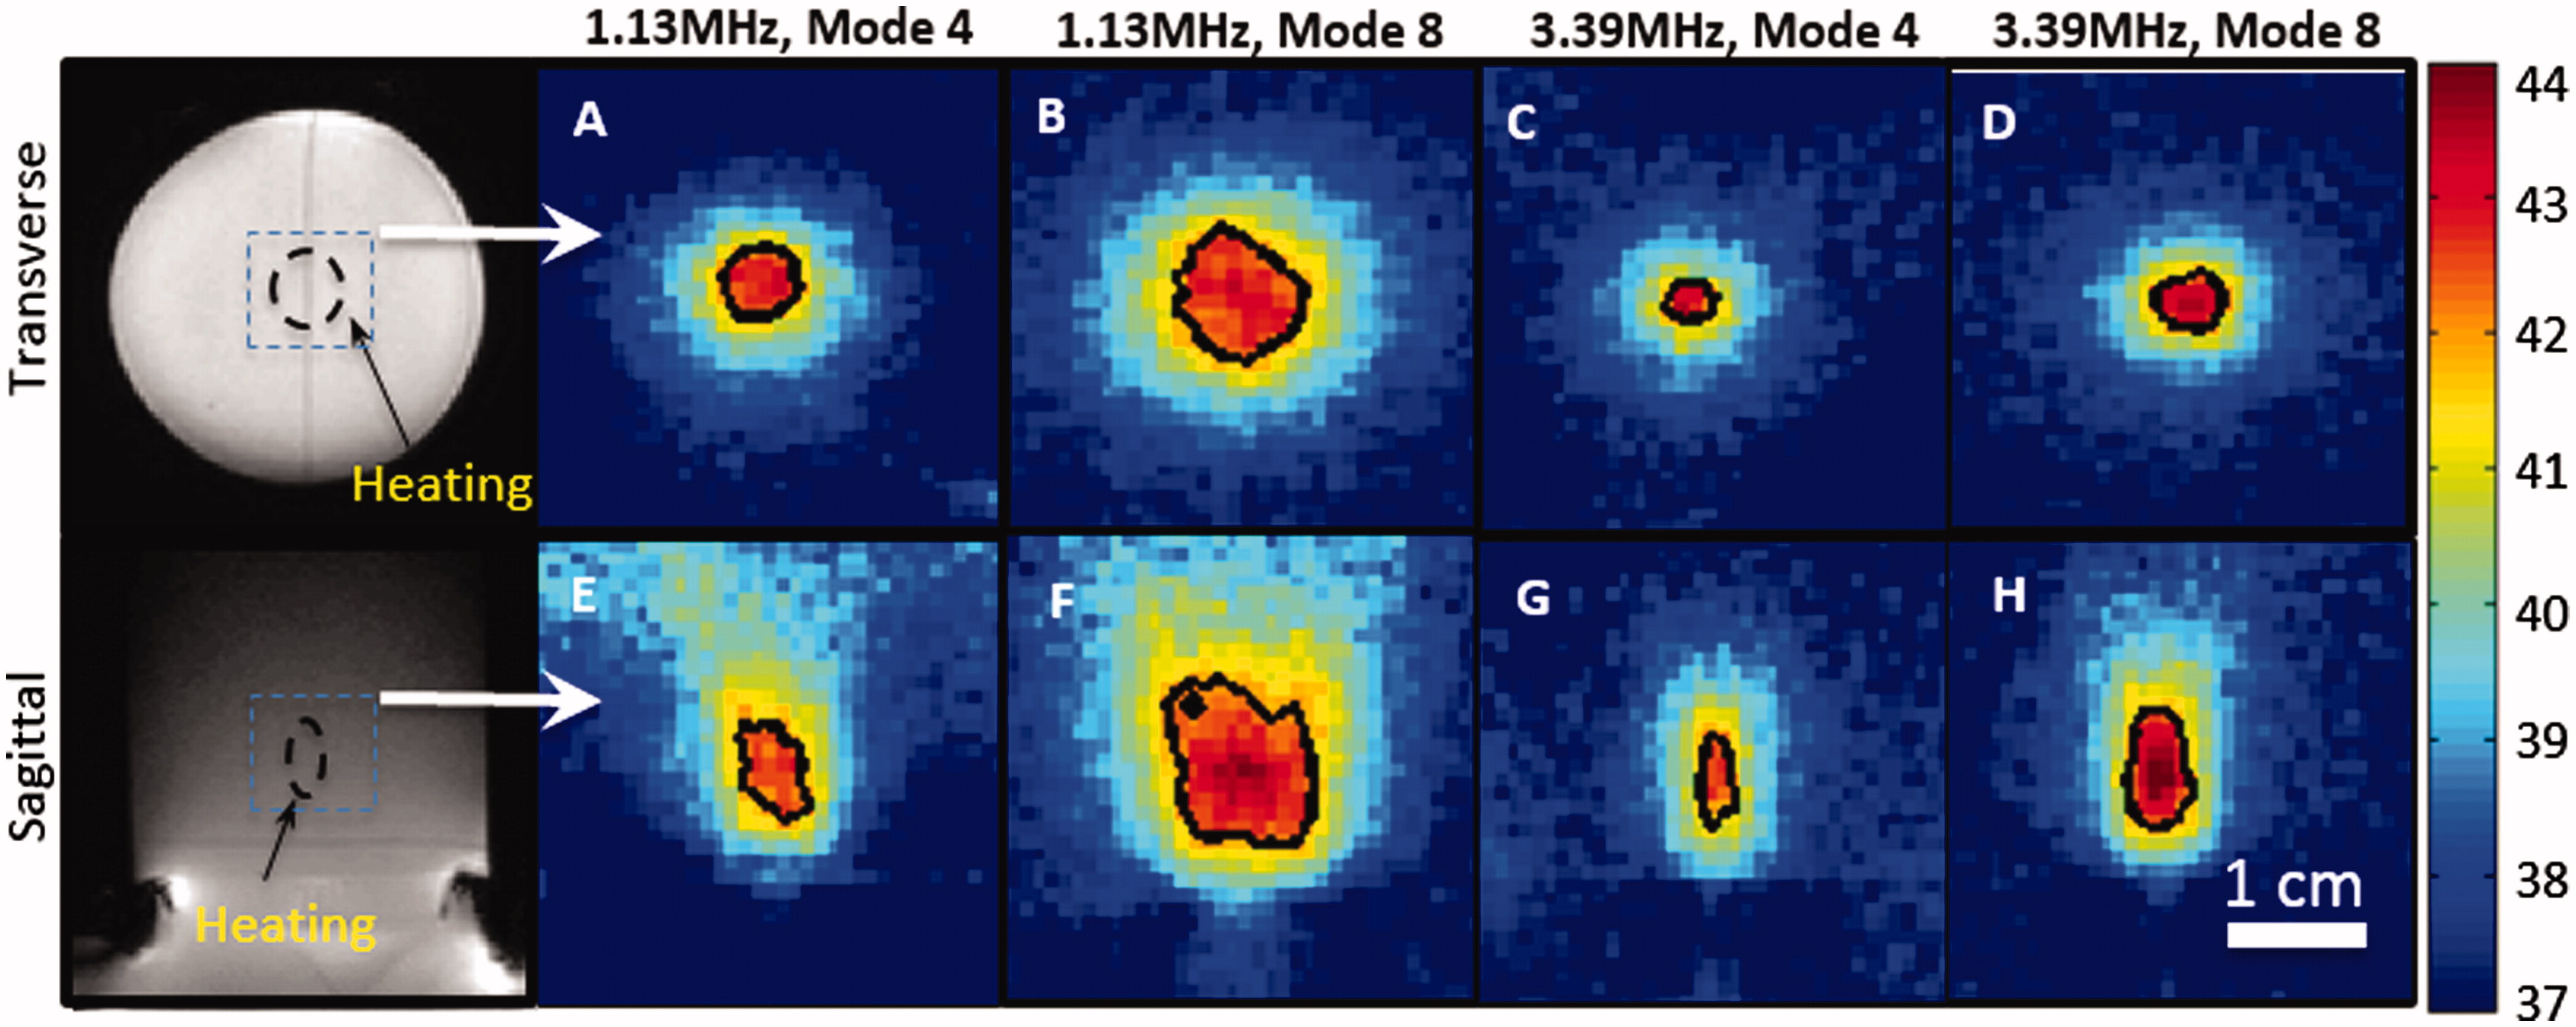 Figure 4. Normalised contour plots of the spatial intensity distribution along the ultrasound beam axis at three different frequencies, using a mode 4 lens.